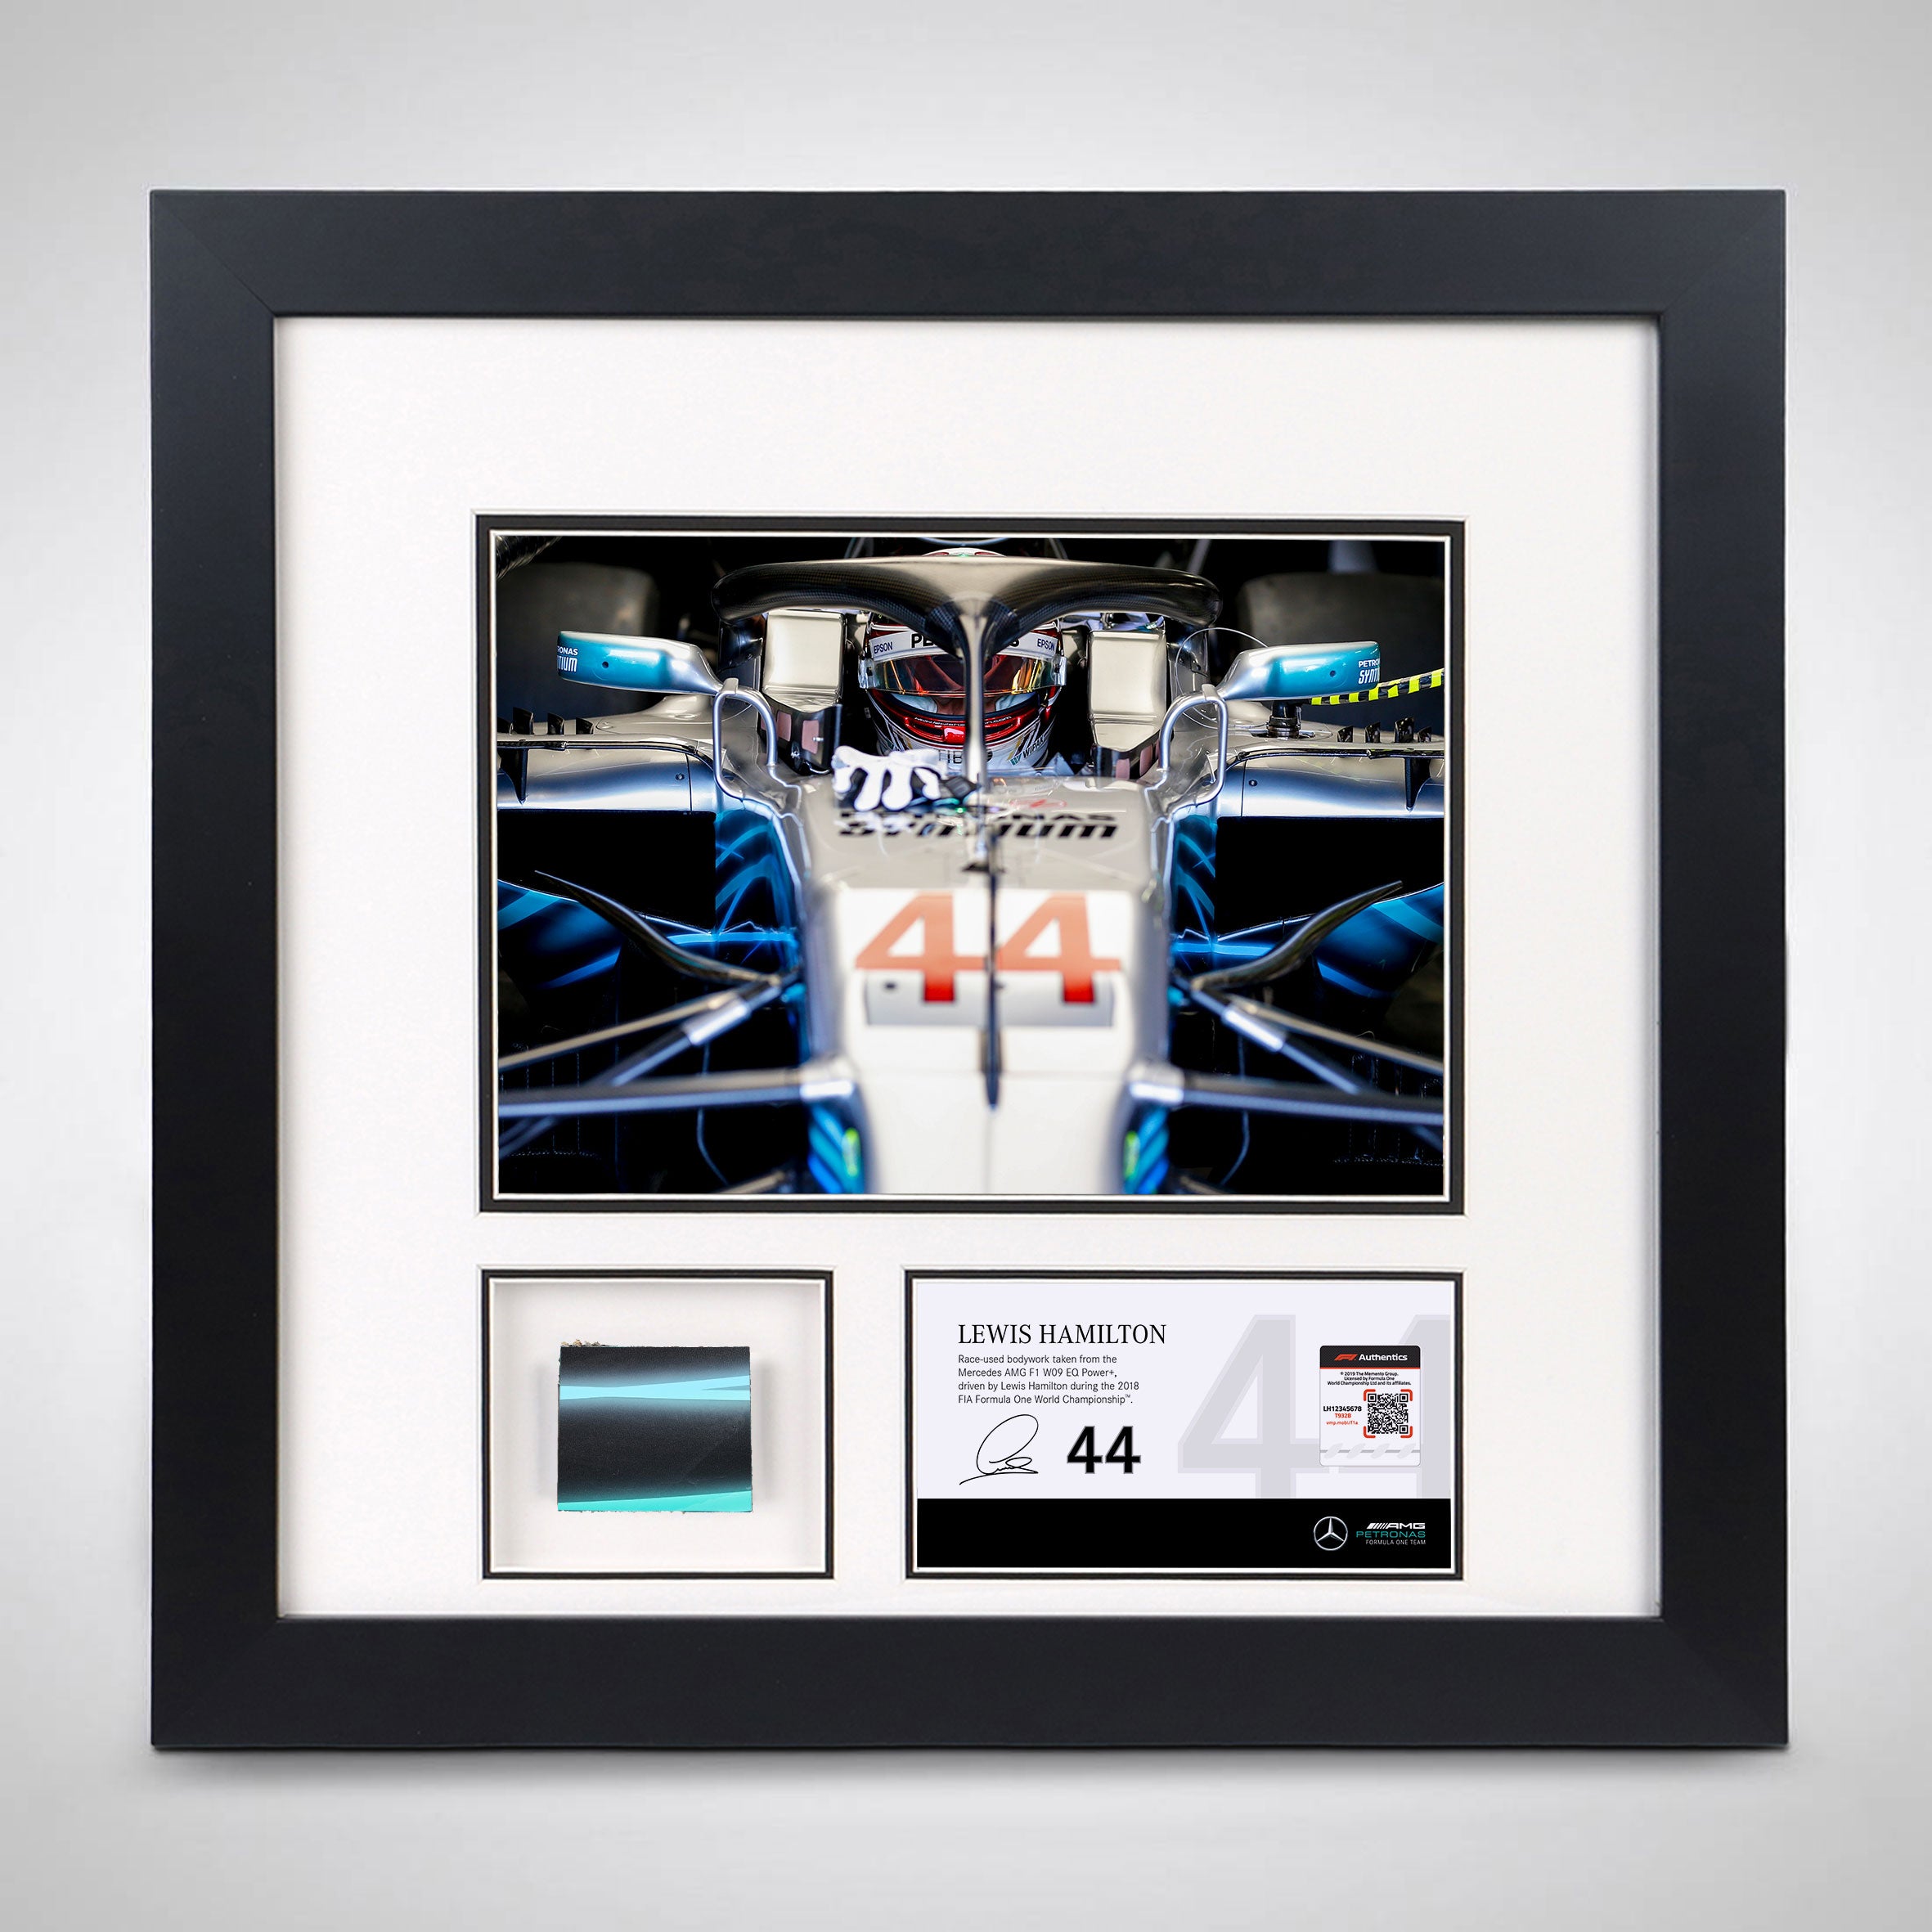 Picture frame with a peice of Lewis Hamilton's Mercedes race car below a picture of him in the car.